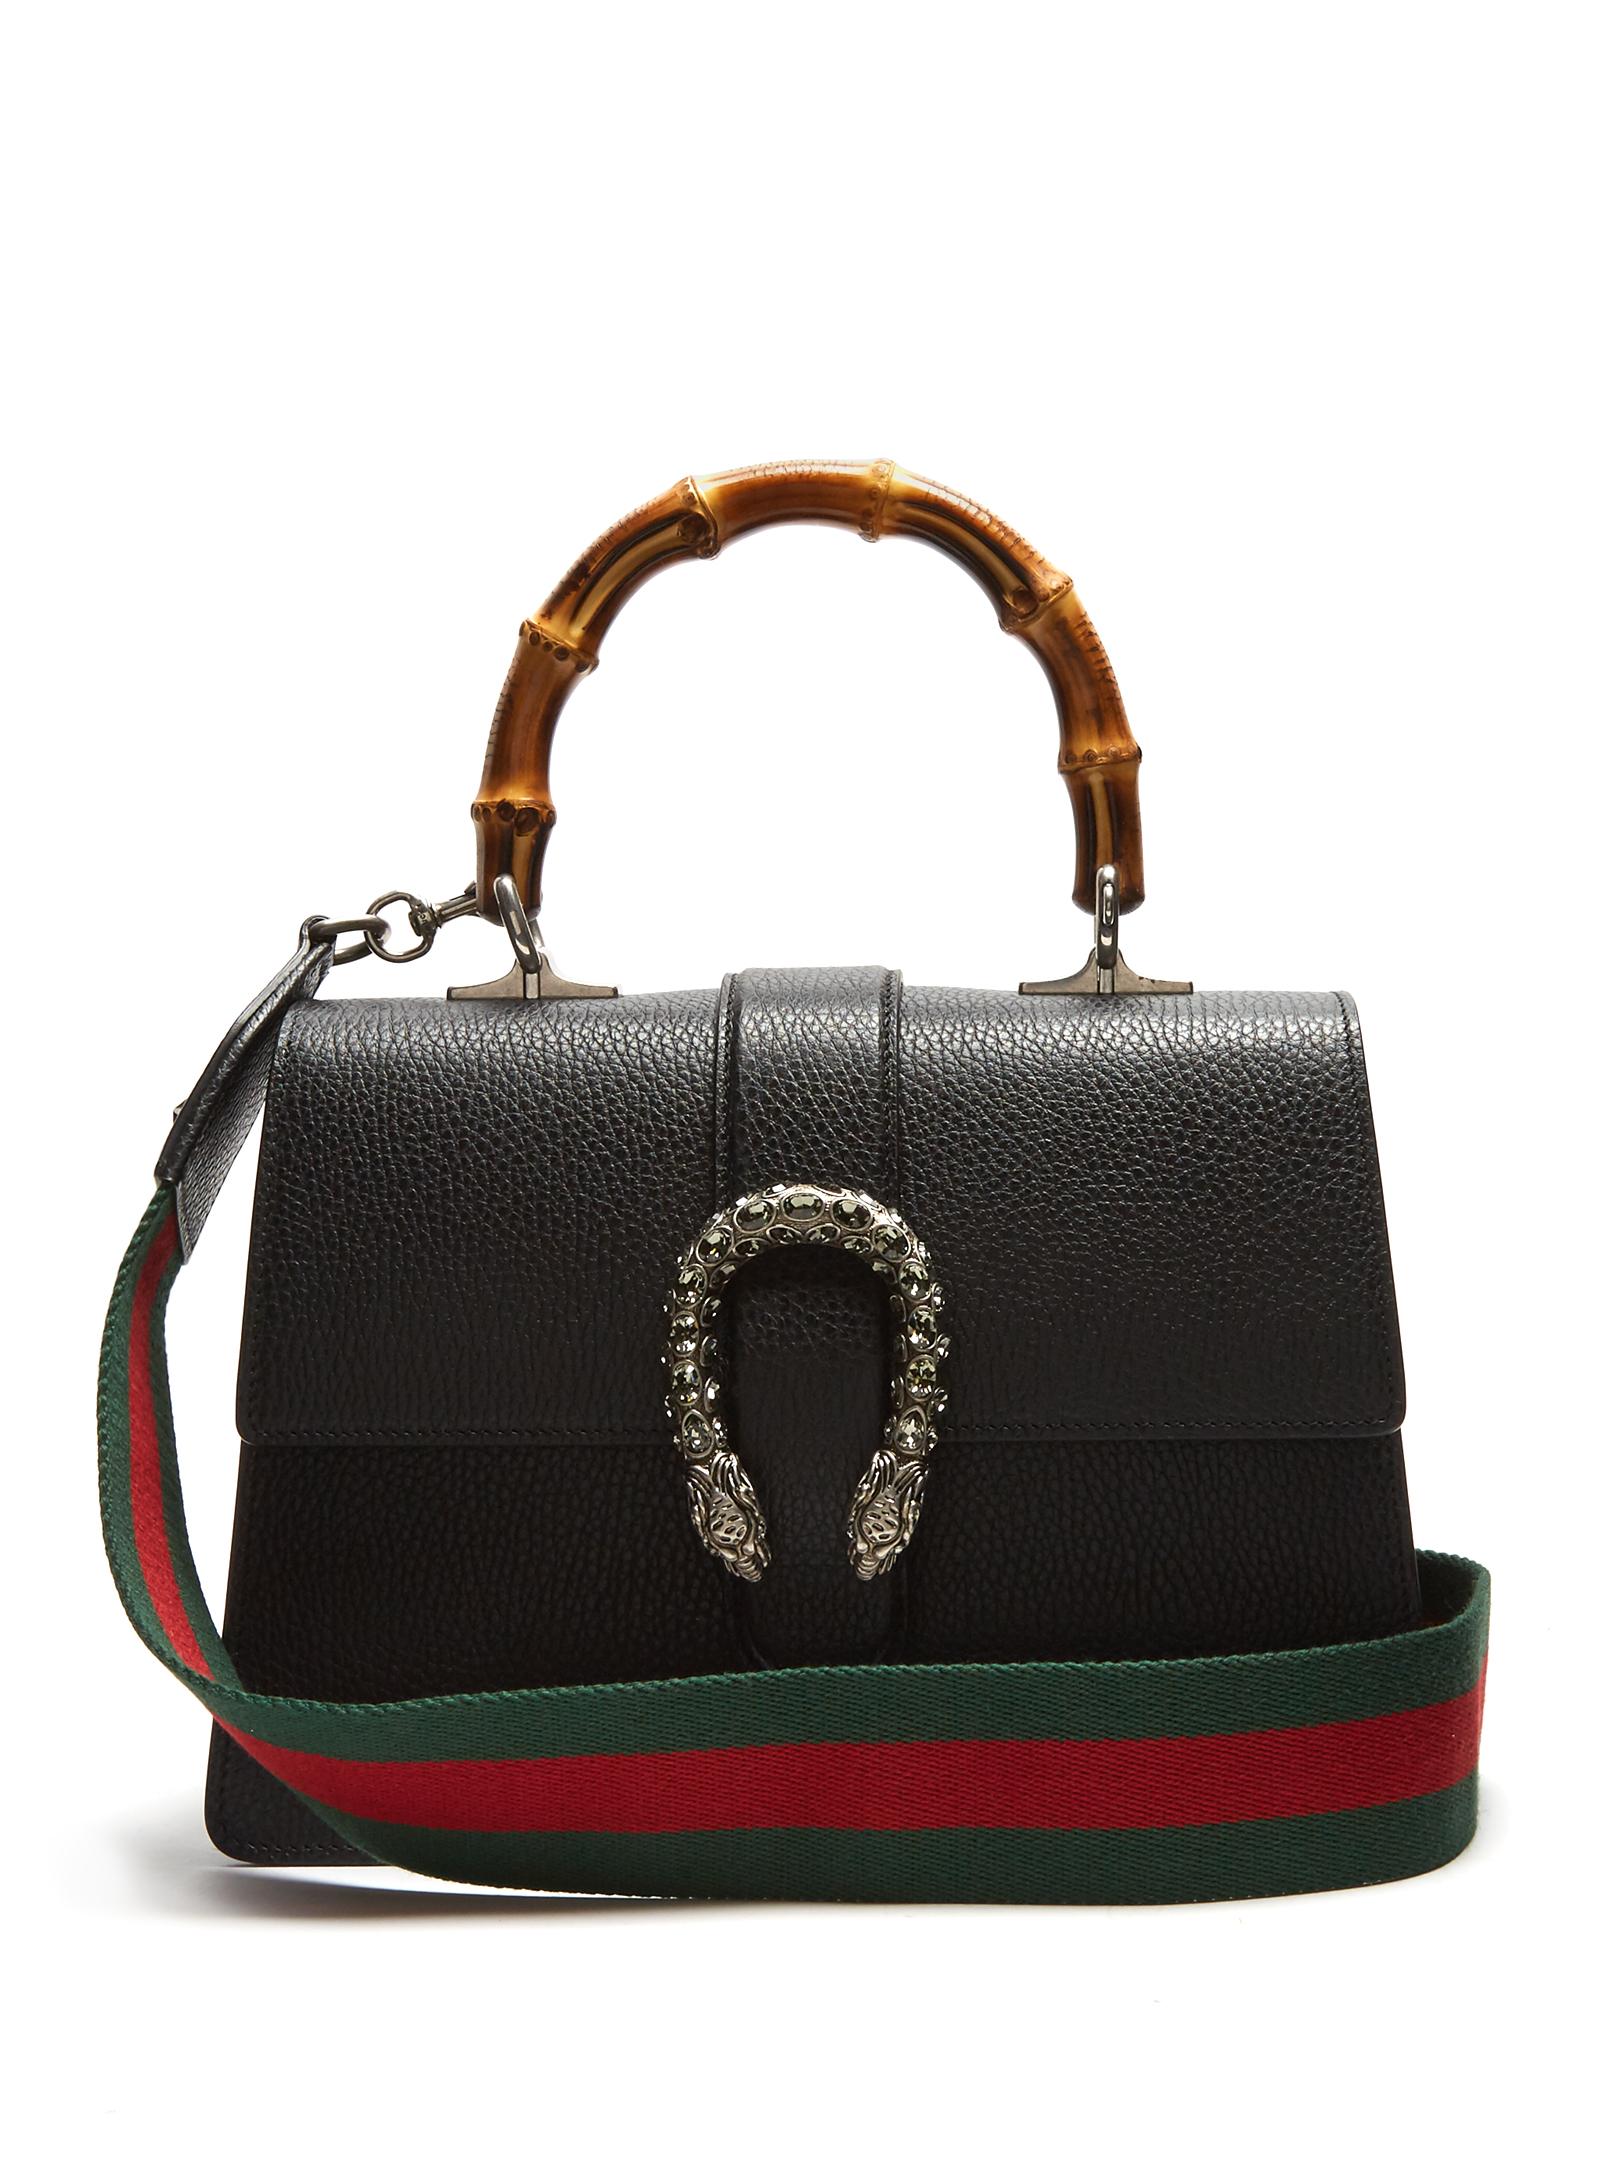 Gucci Dionysus Bamboo-handle Medium Leather Tote in Black | Lyst Canada